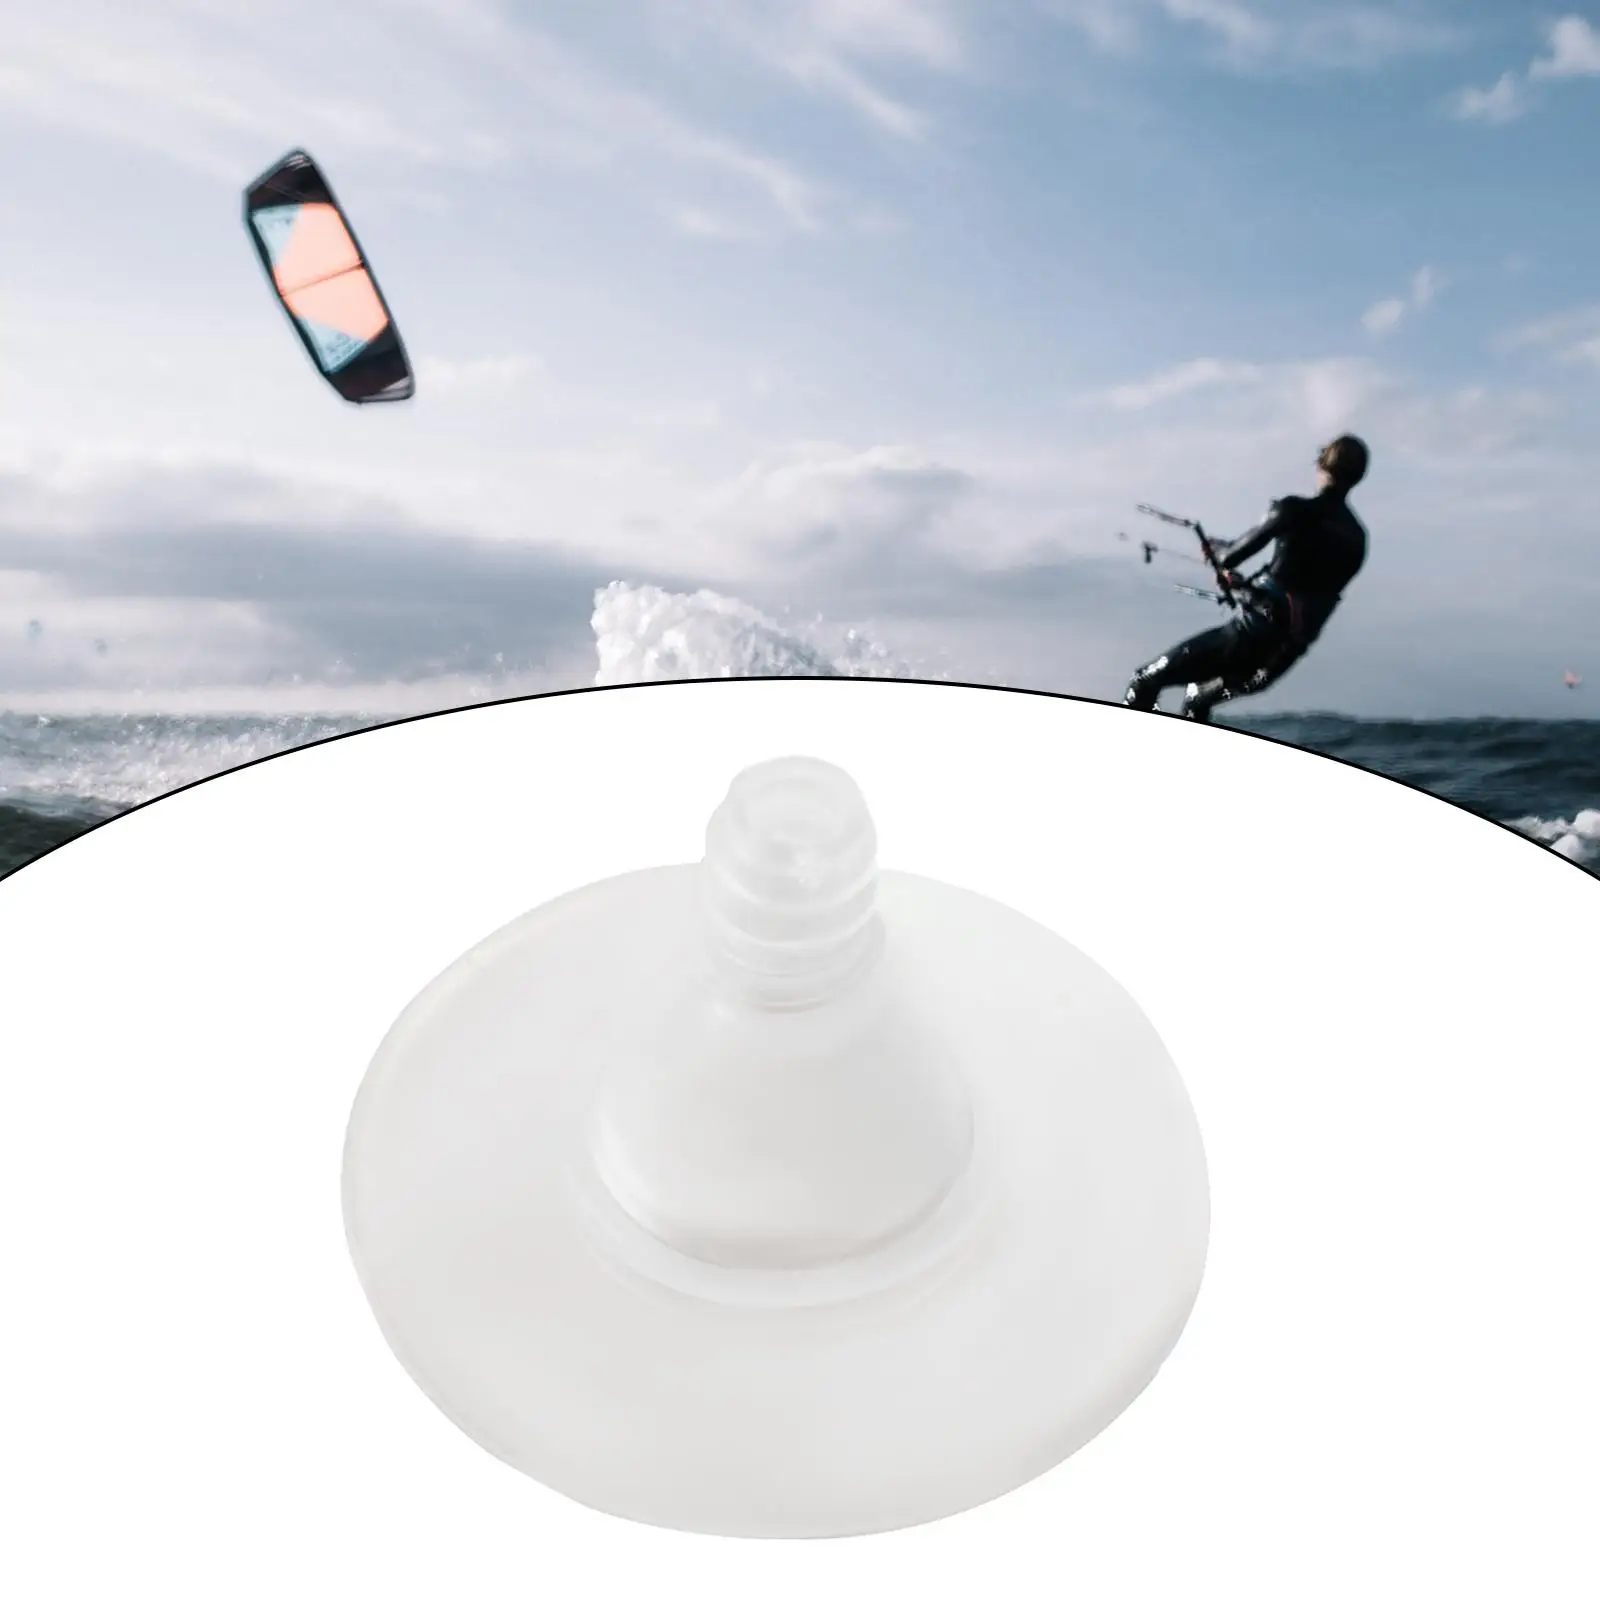 TPU Inflatable Kitesurfing Kite Inflate One Pump Valve Air Inlet without Self Stick for Repair Accessories